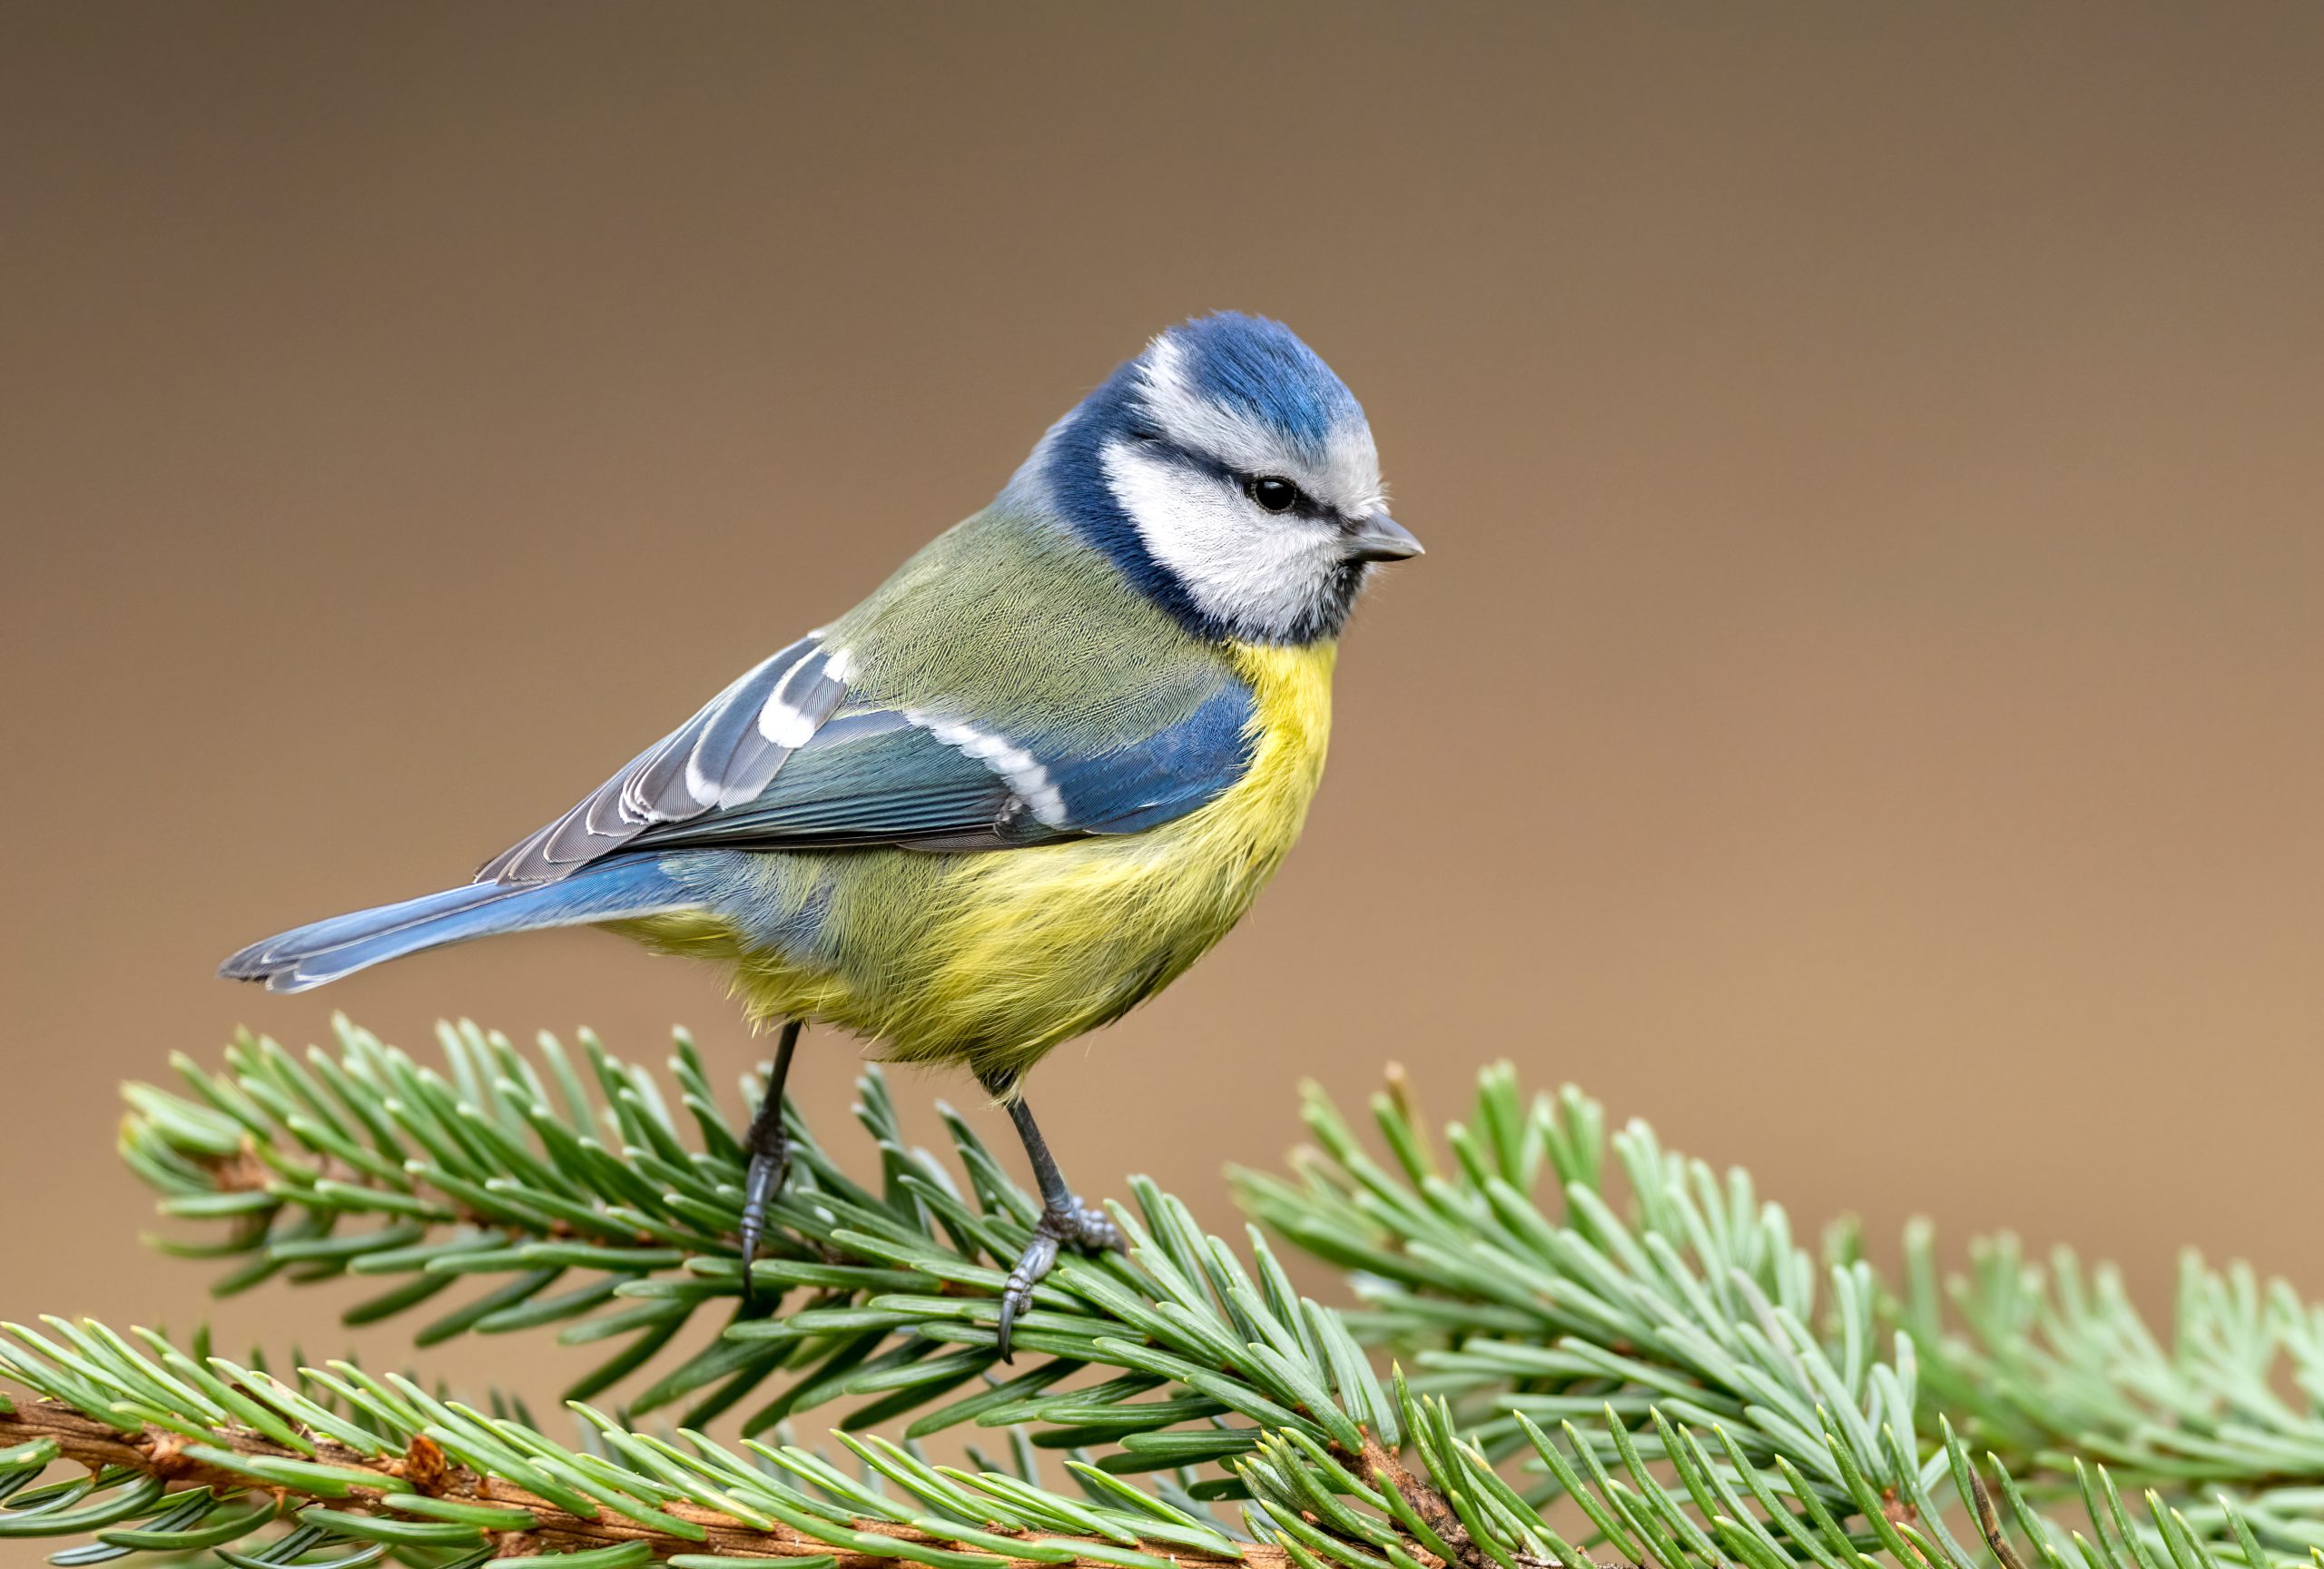 What Does A Blue Tit Sound Like?